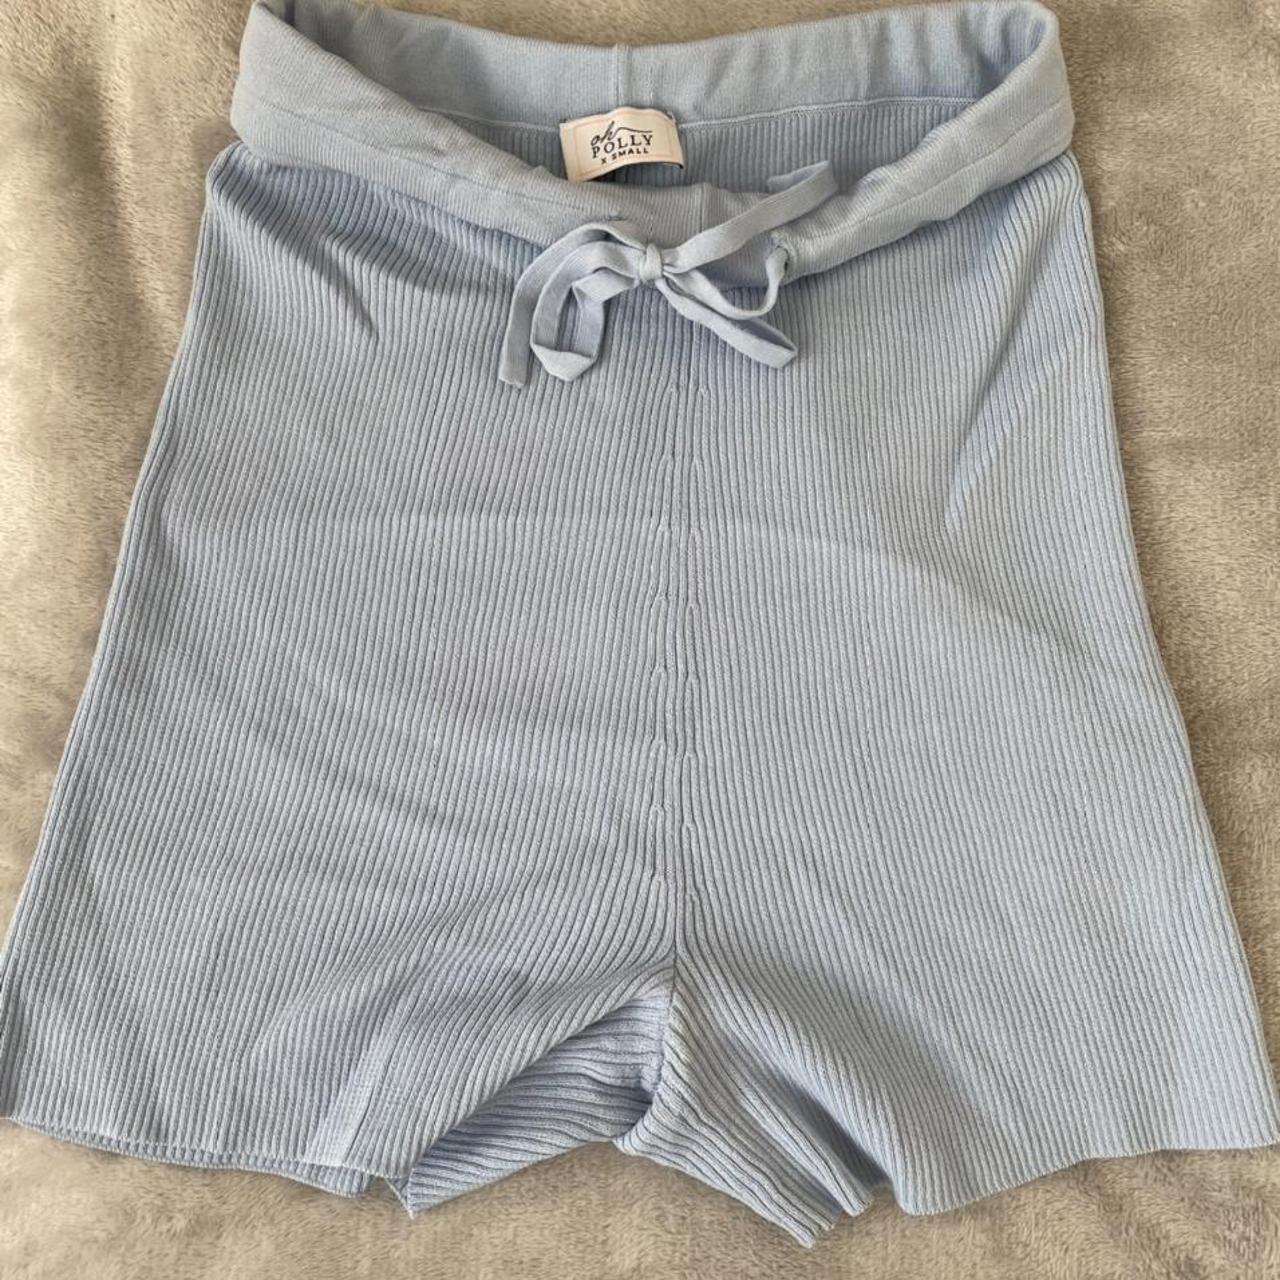 Oh Polly shorts Cute blue shorts Perfect for... - Depop